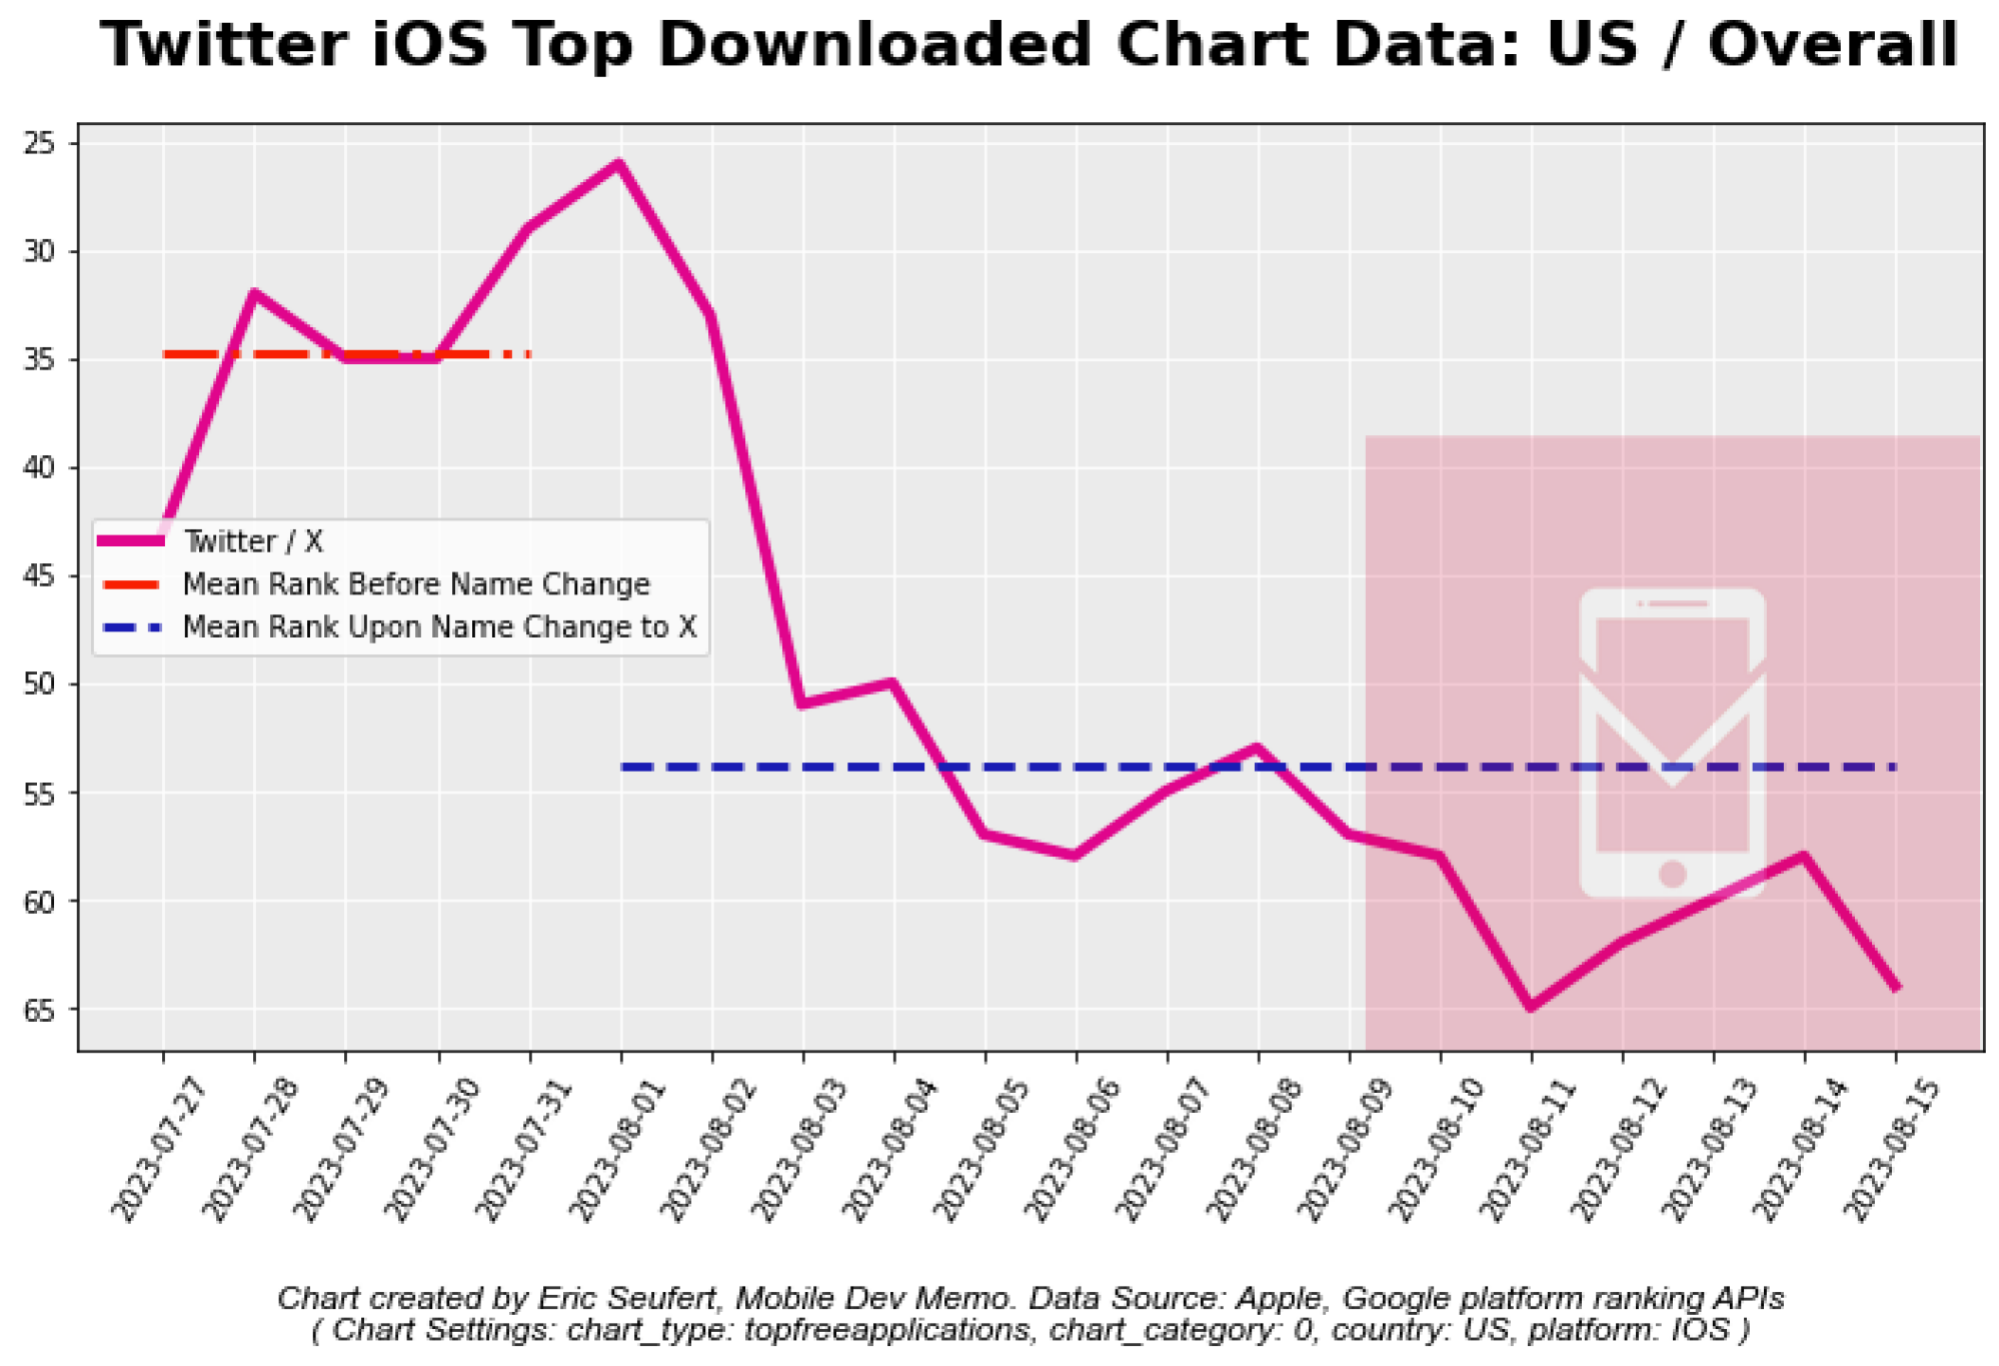 Seufert's chart. Dates are on the X axis, rankings on the Y. A pink line mark's the app's daily ranking, and it declines post-name change.